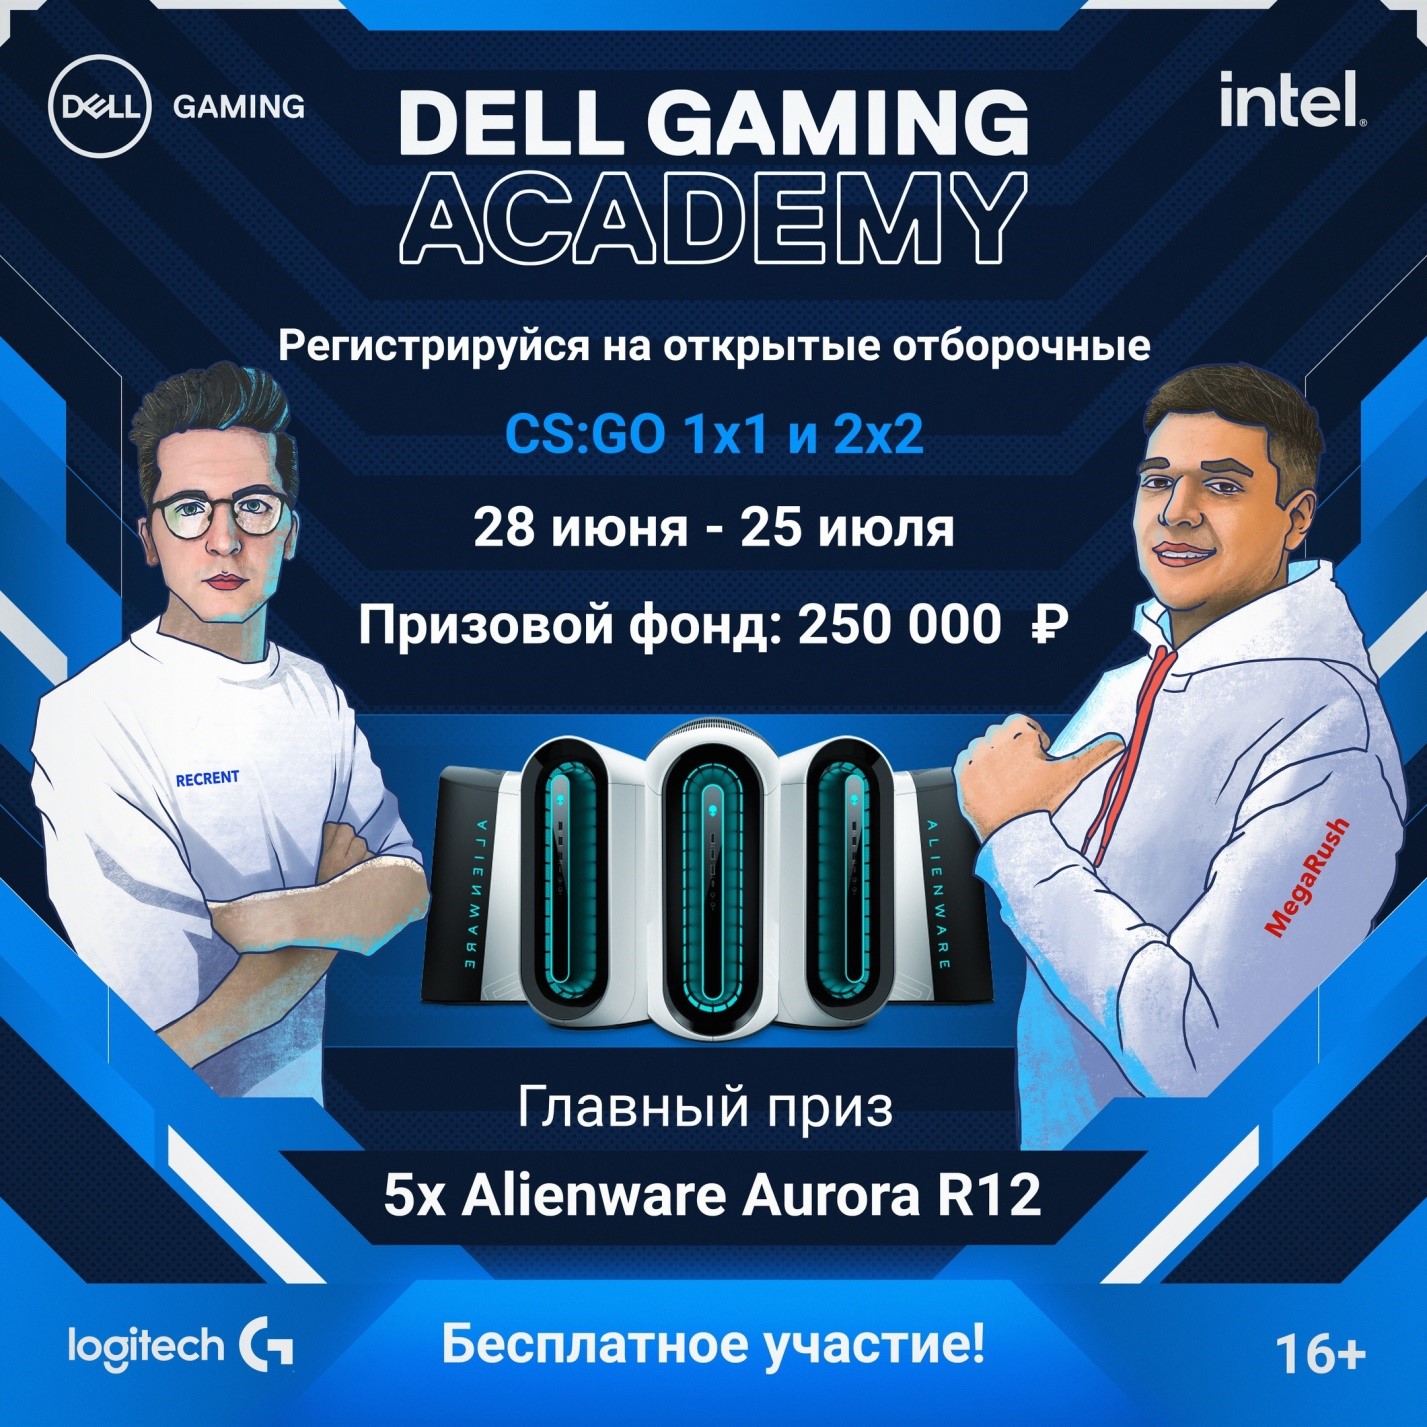 Dell Gaming Academy